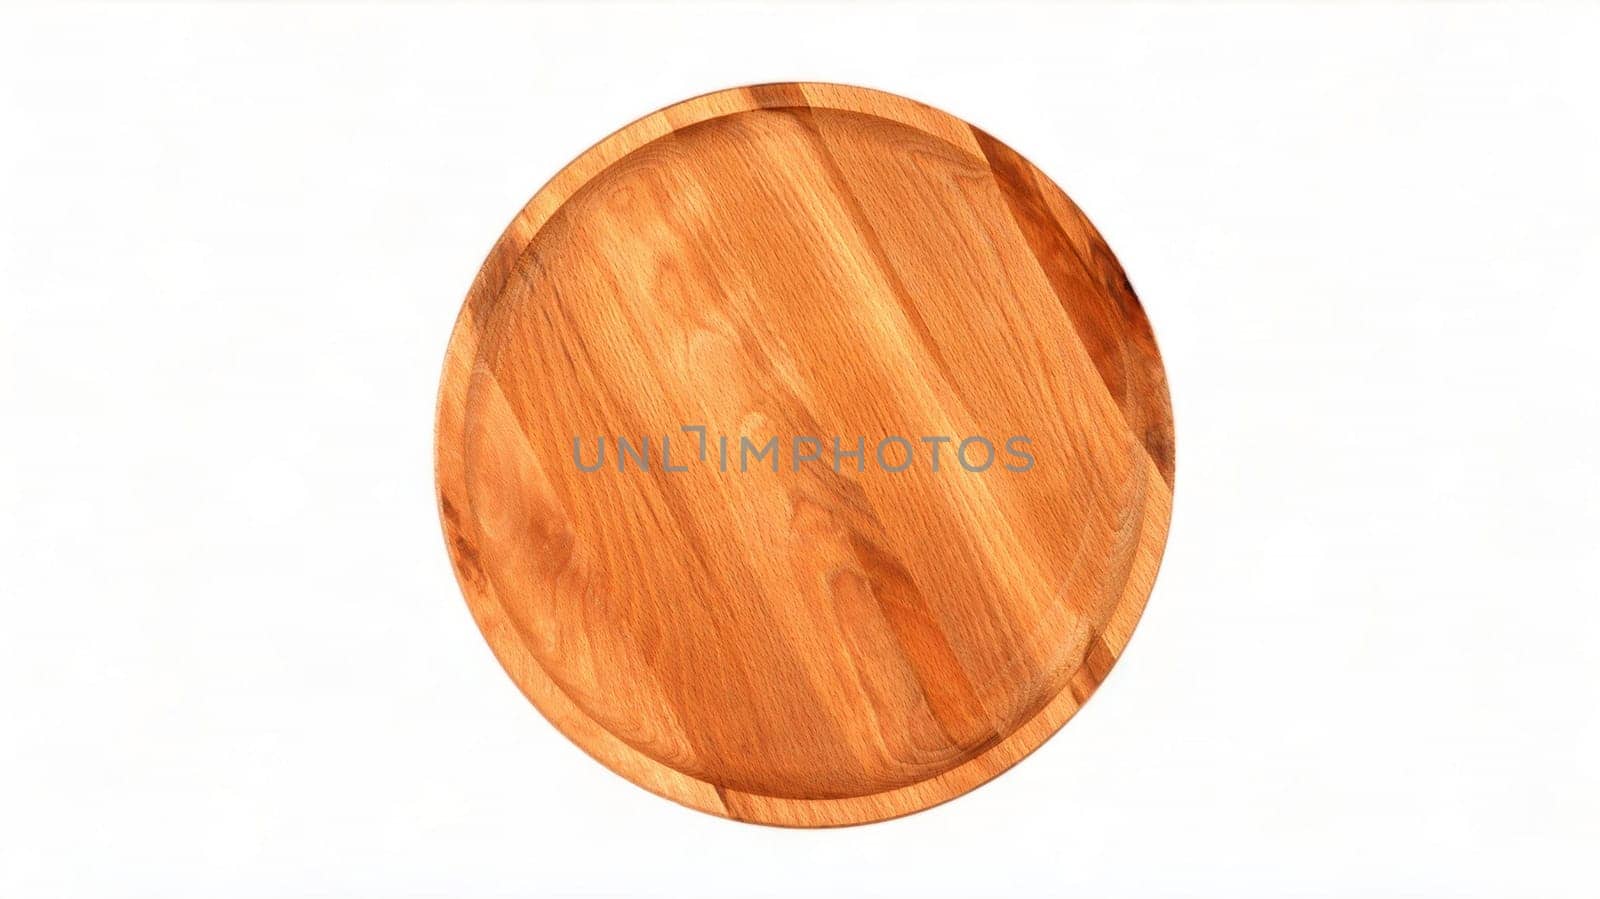 Top view and perspective of empty round wooden plate on white background. Space for branding, text or menu. Business food brand template. Layout. Cooking food. Culinary background. Flat layout. by Roshchyn